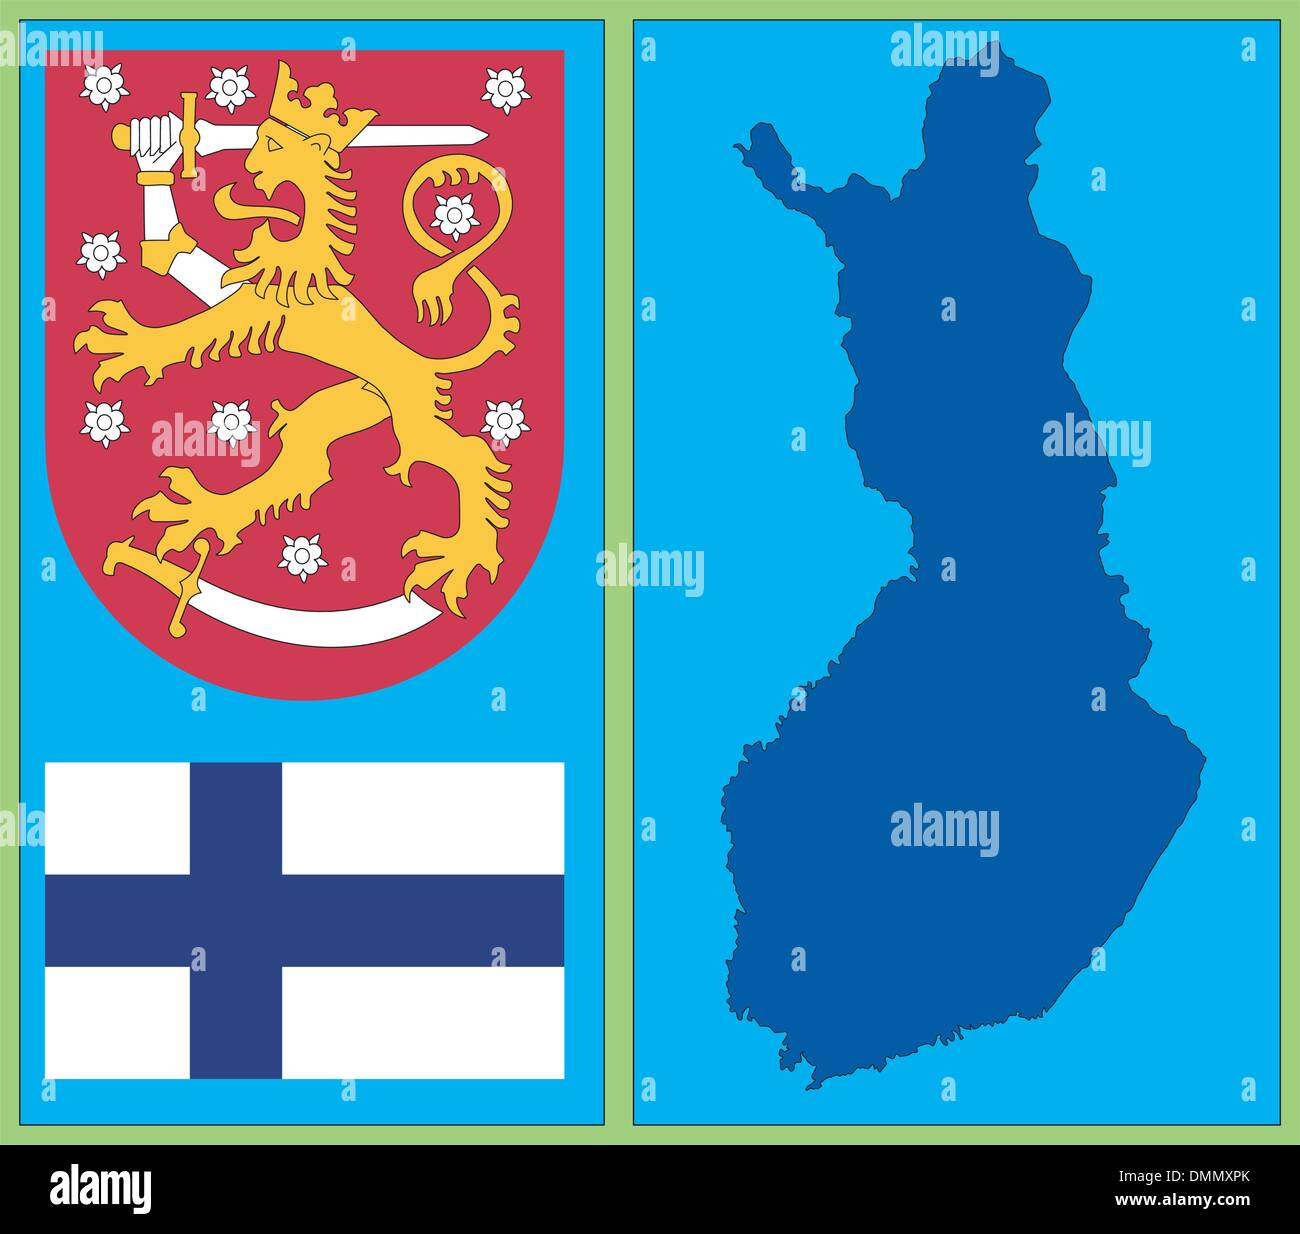 national attributes of Finland Stock Vector